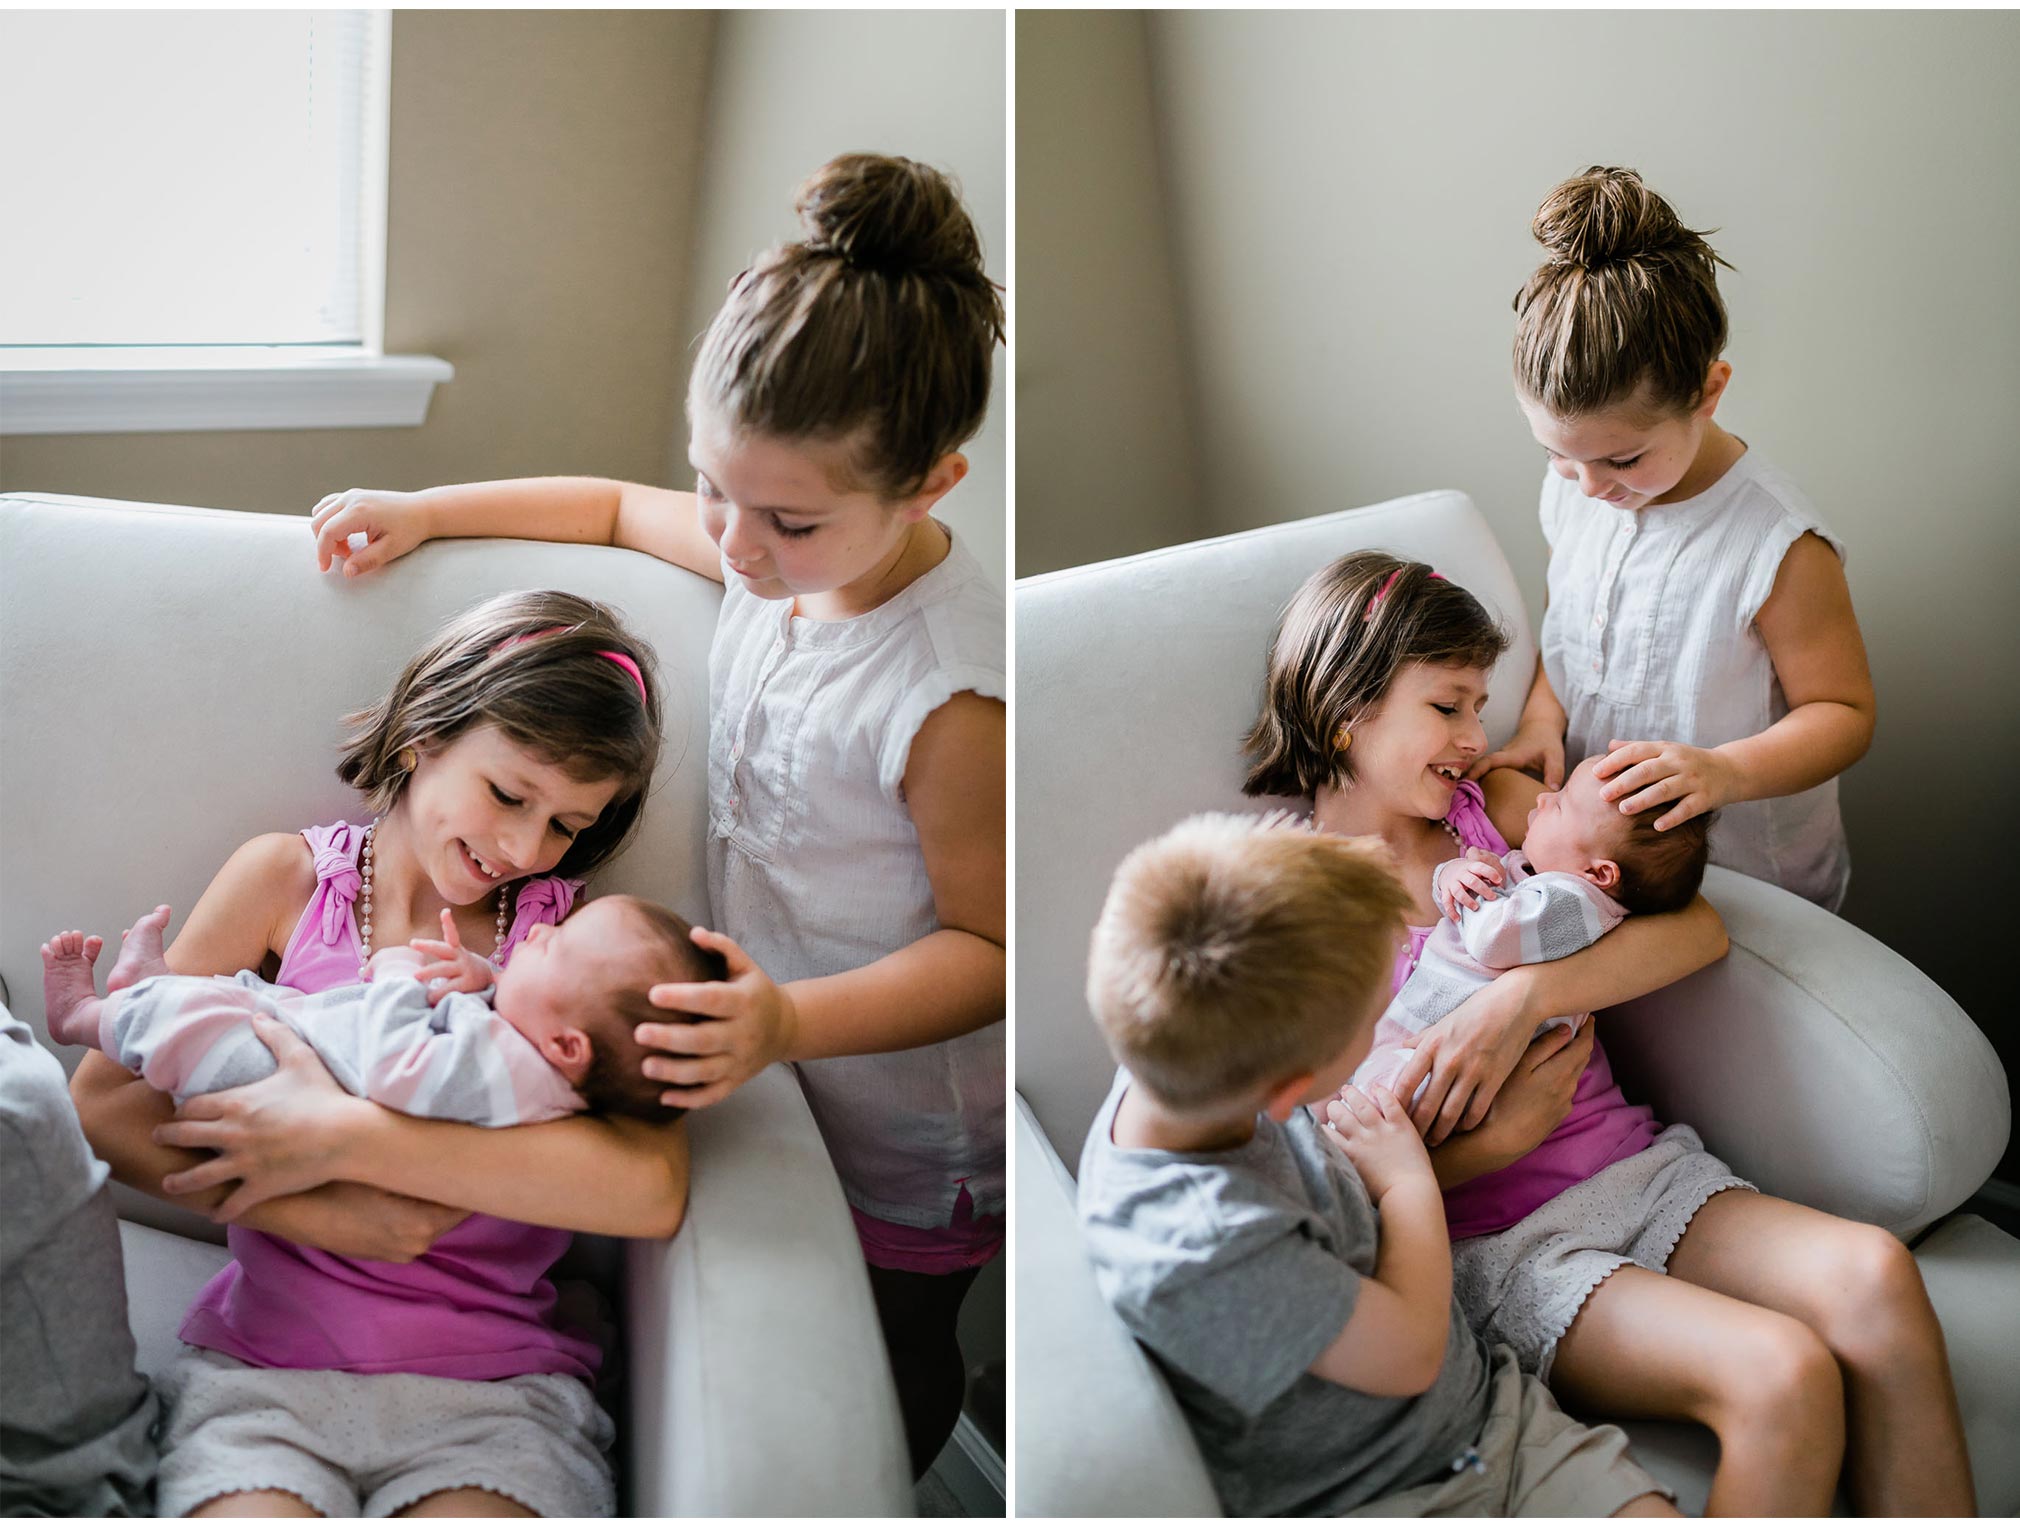 Raleigh Newborn Photographer | By G. Lin Photography | Siblings holding baby sister by window